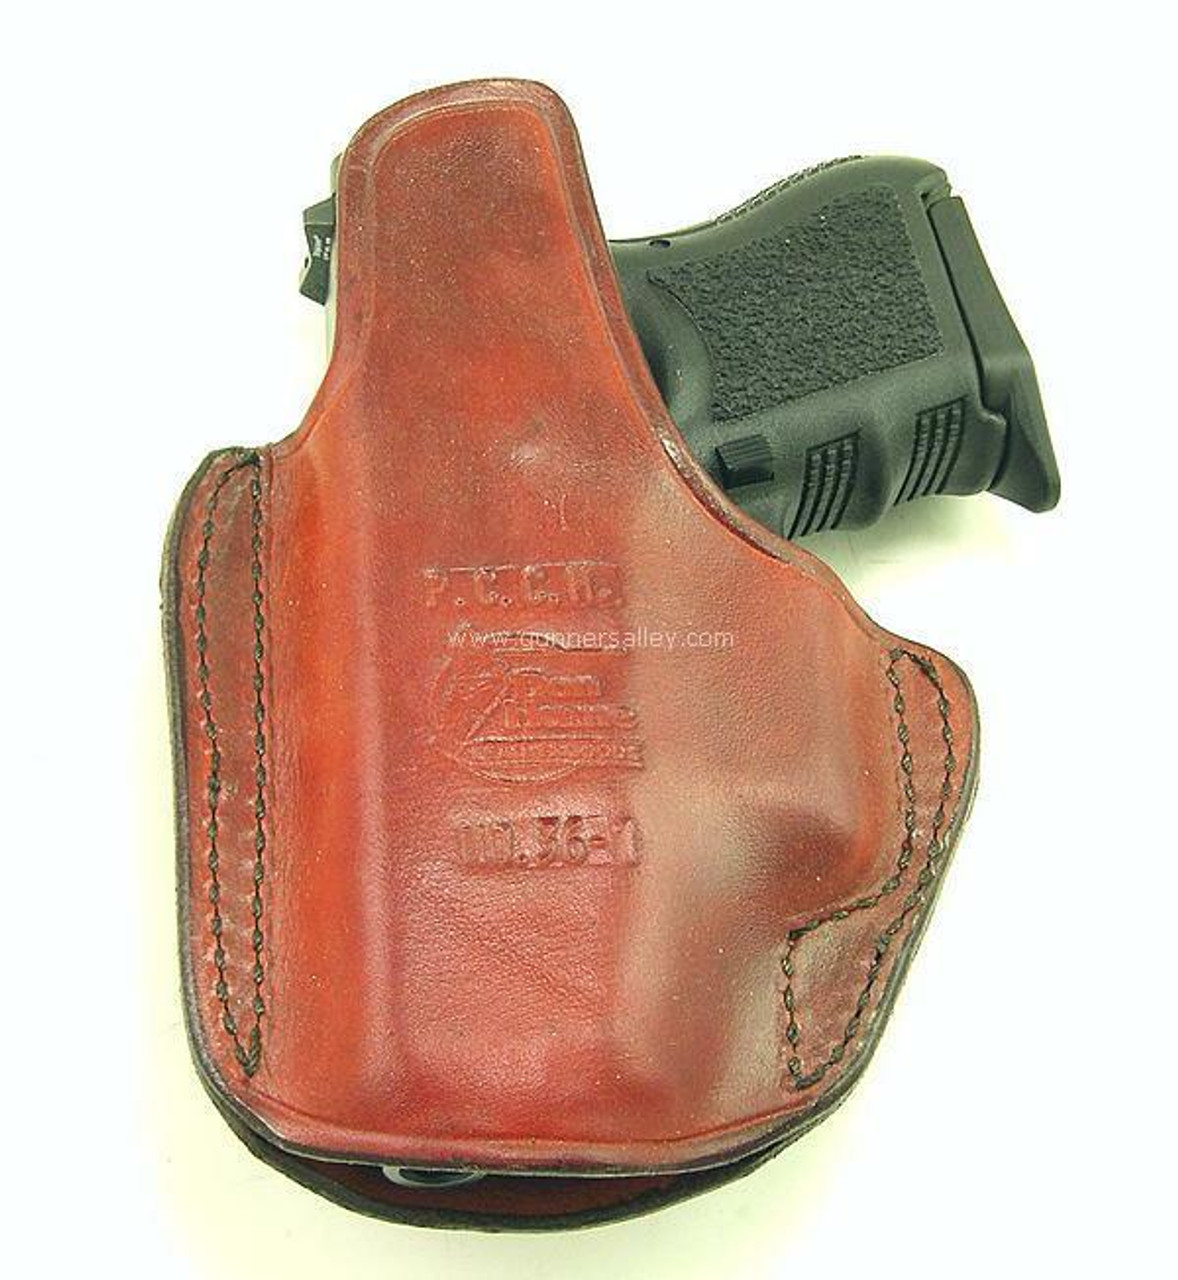 Rear View - Shown with a Glock 26 model for Demonstration Purposes